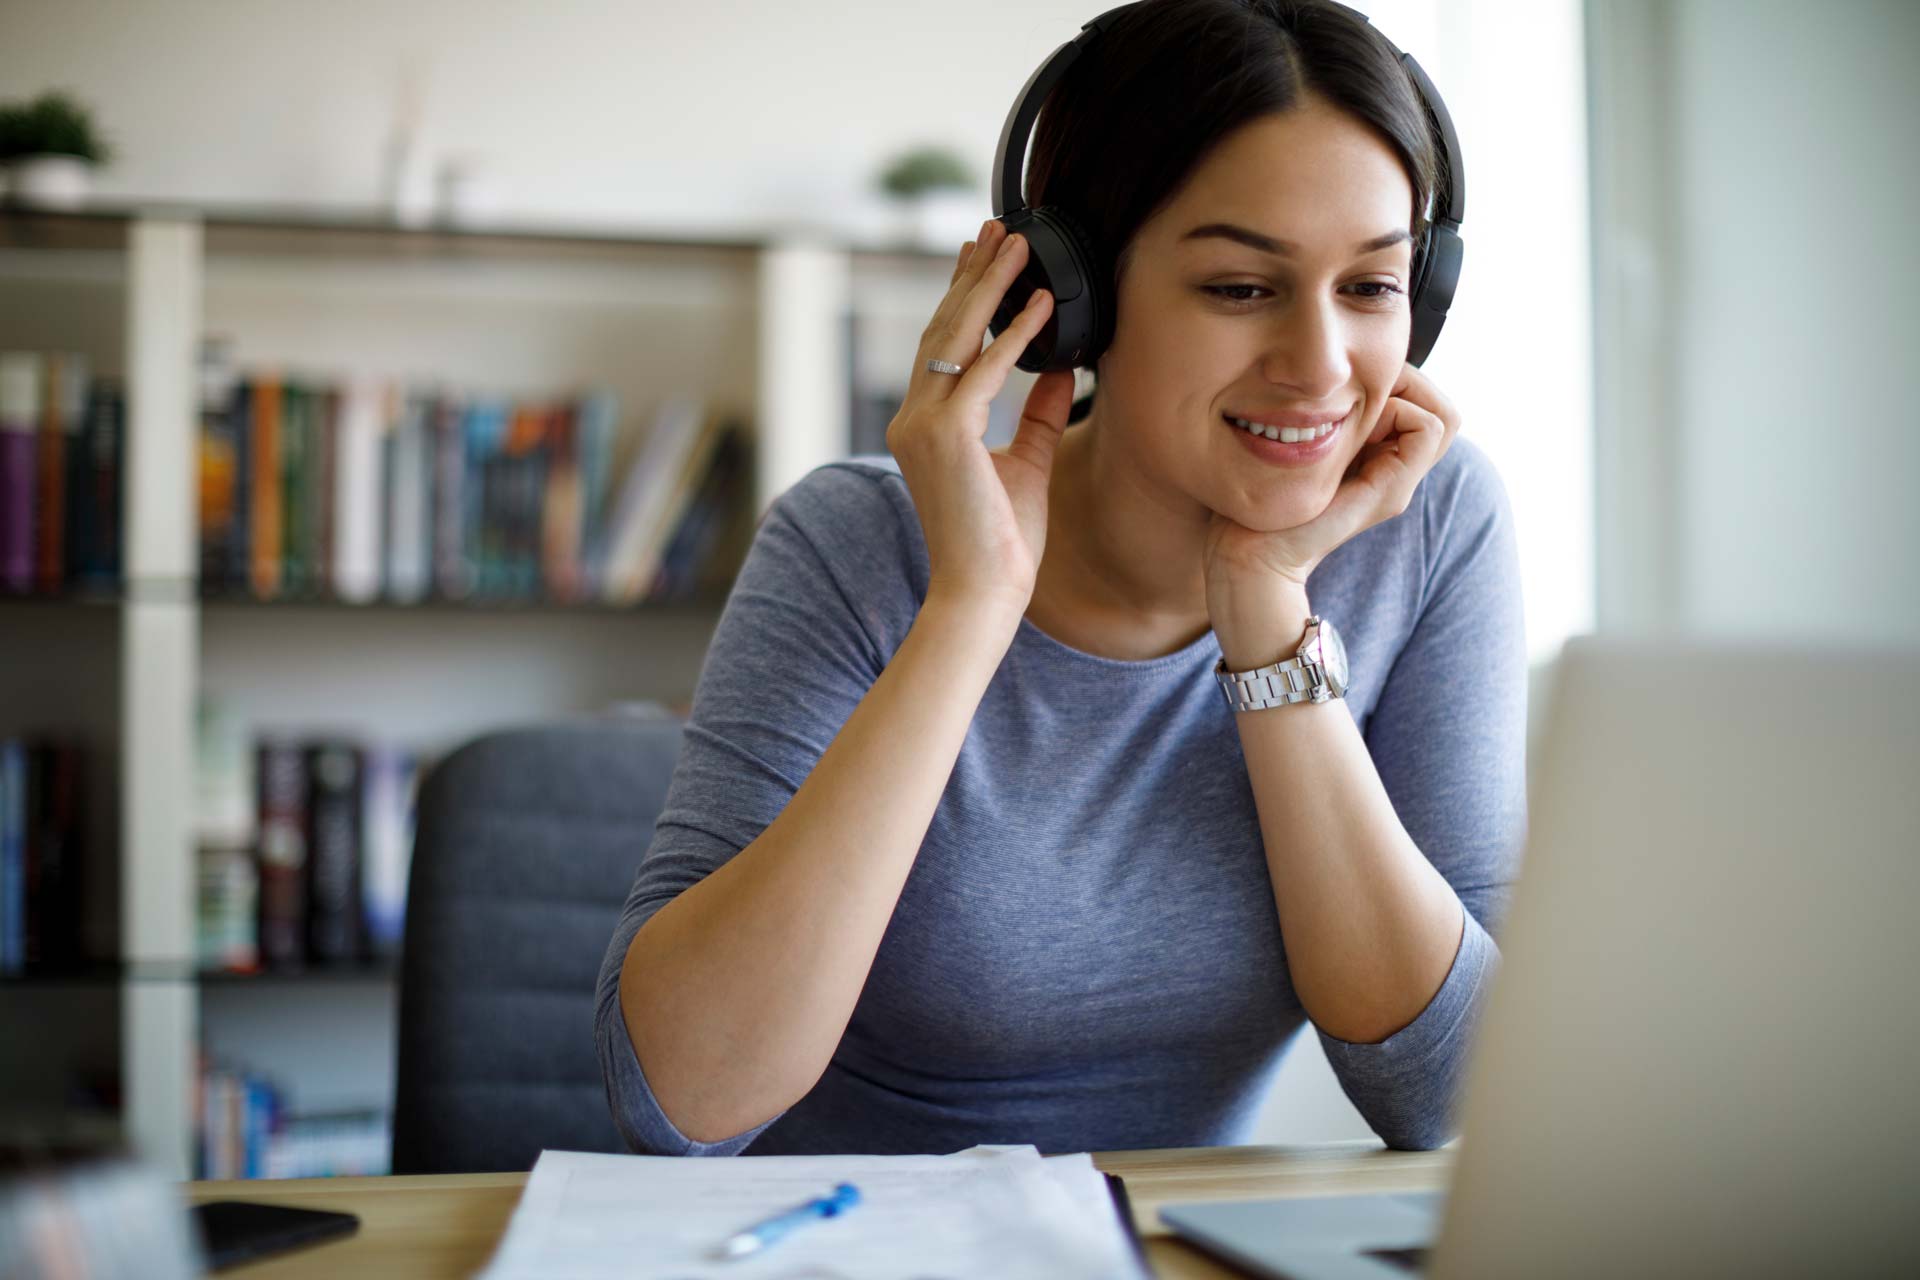 woman_with_headphones_smiling_watching_laptop